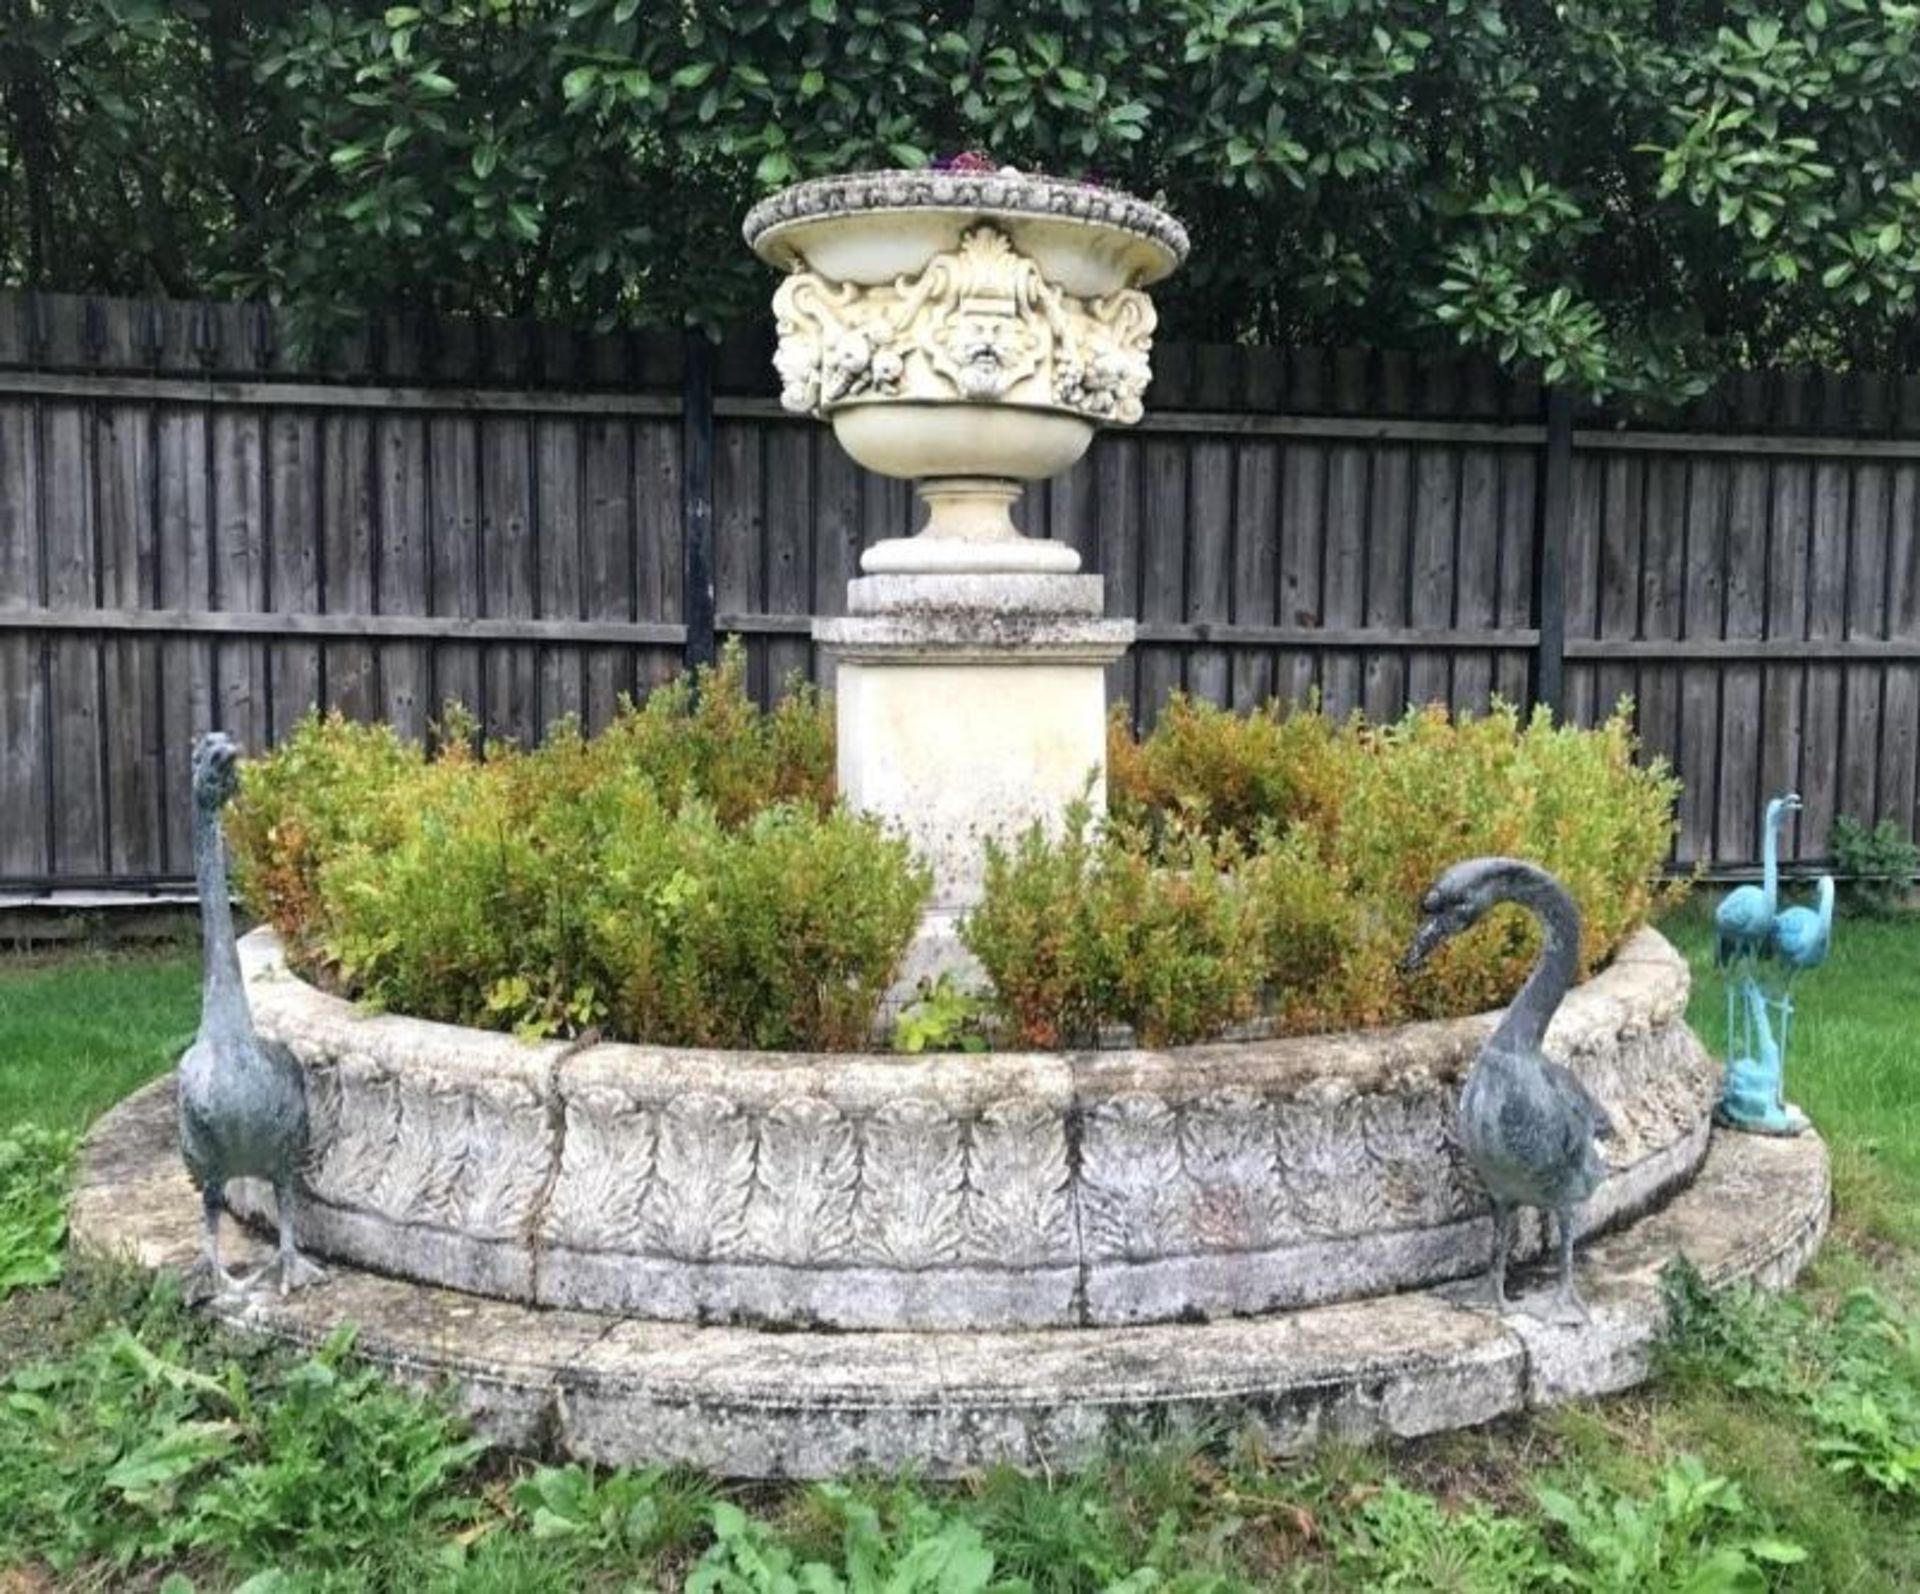 A Magnificent Period Style Circular Stone Fountain Pond With Mature Herbaceous Borders - 3 Metres In